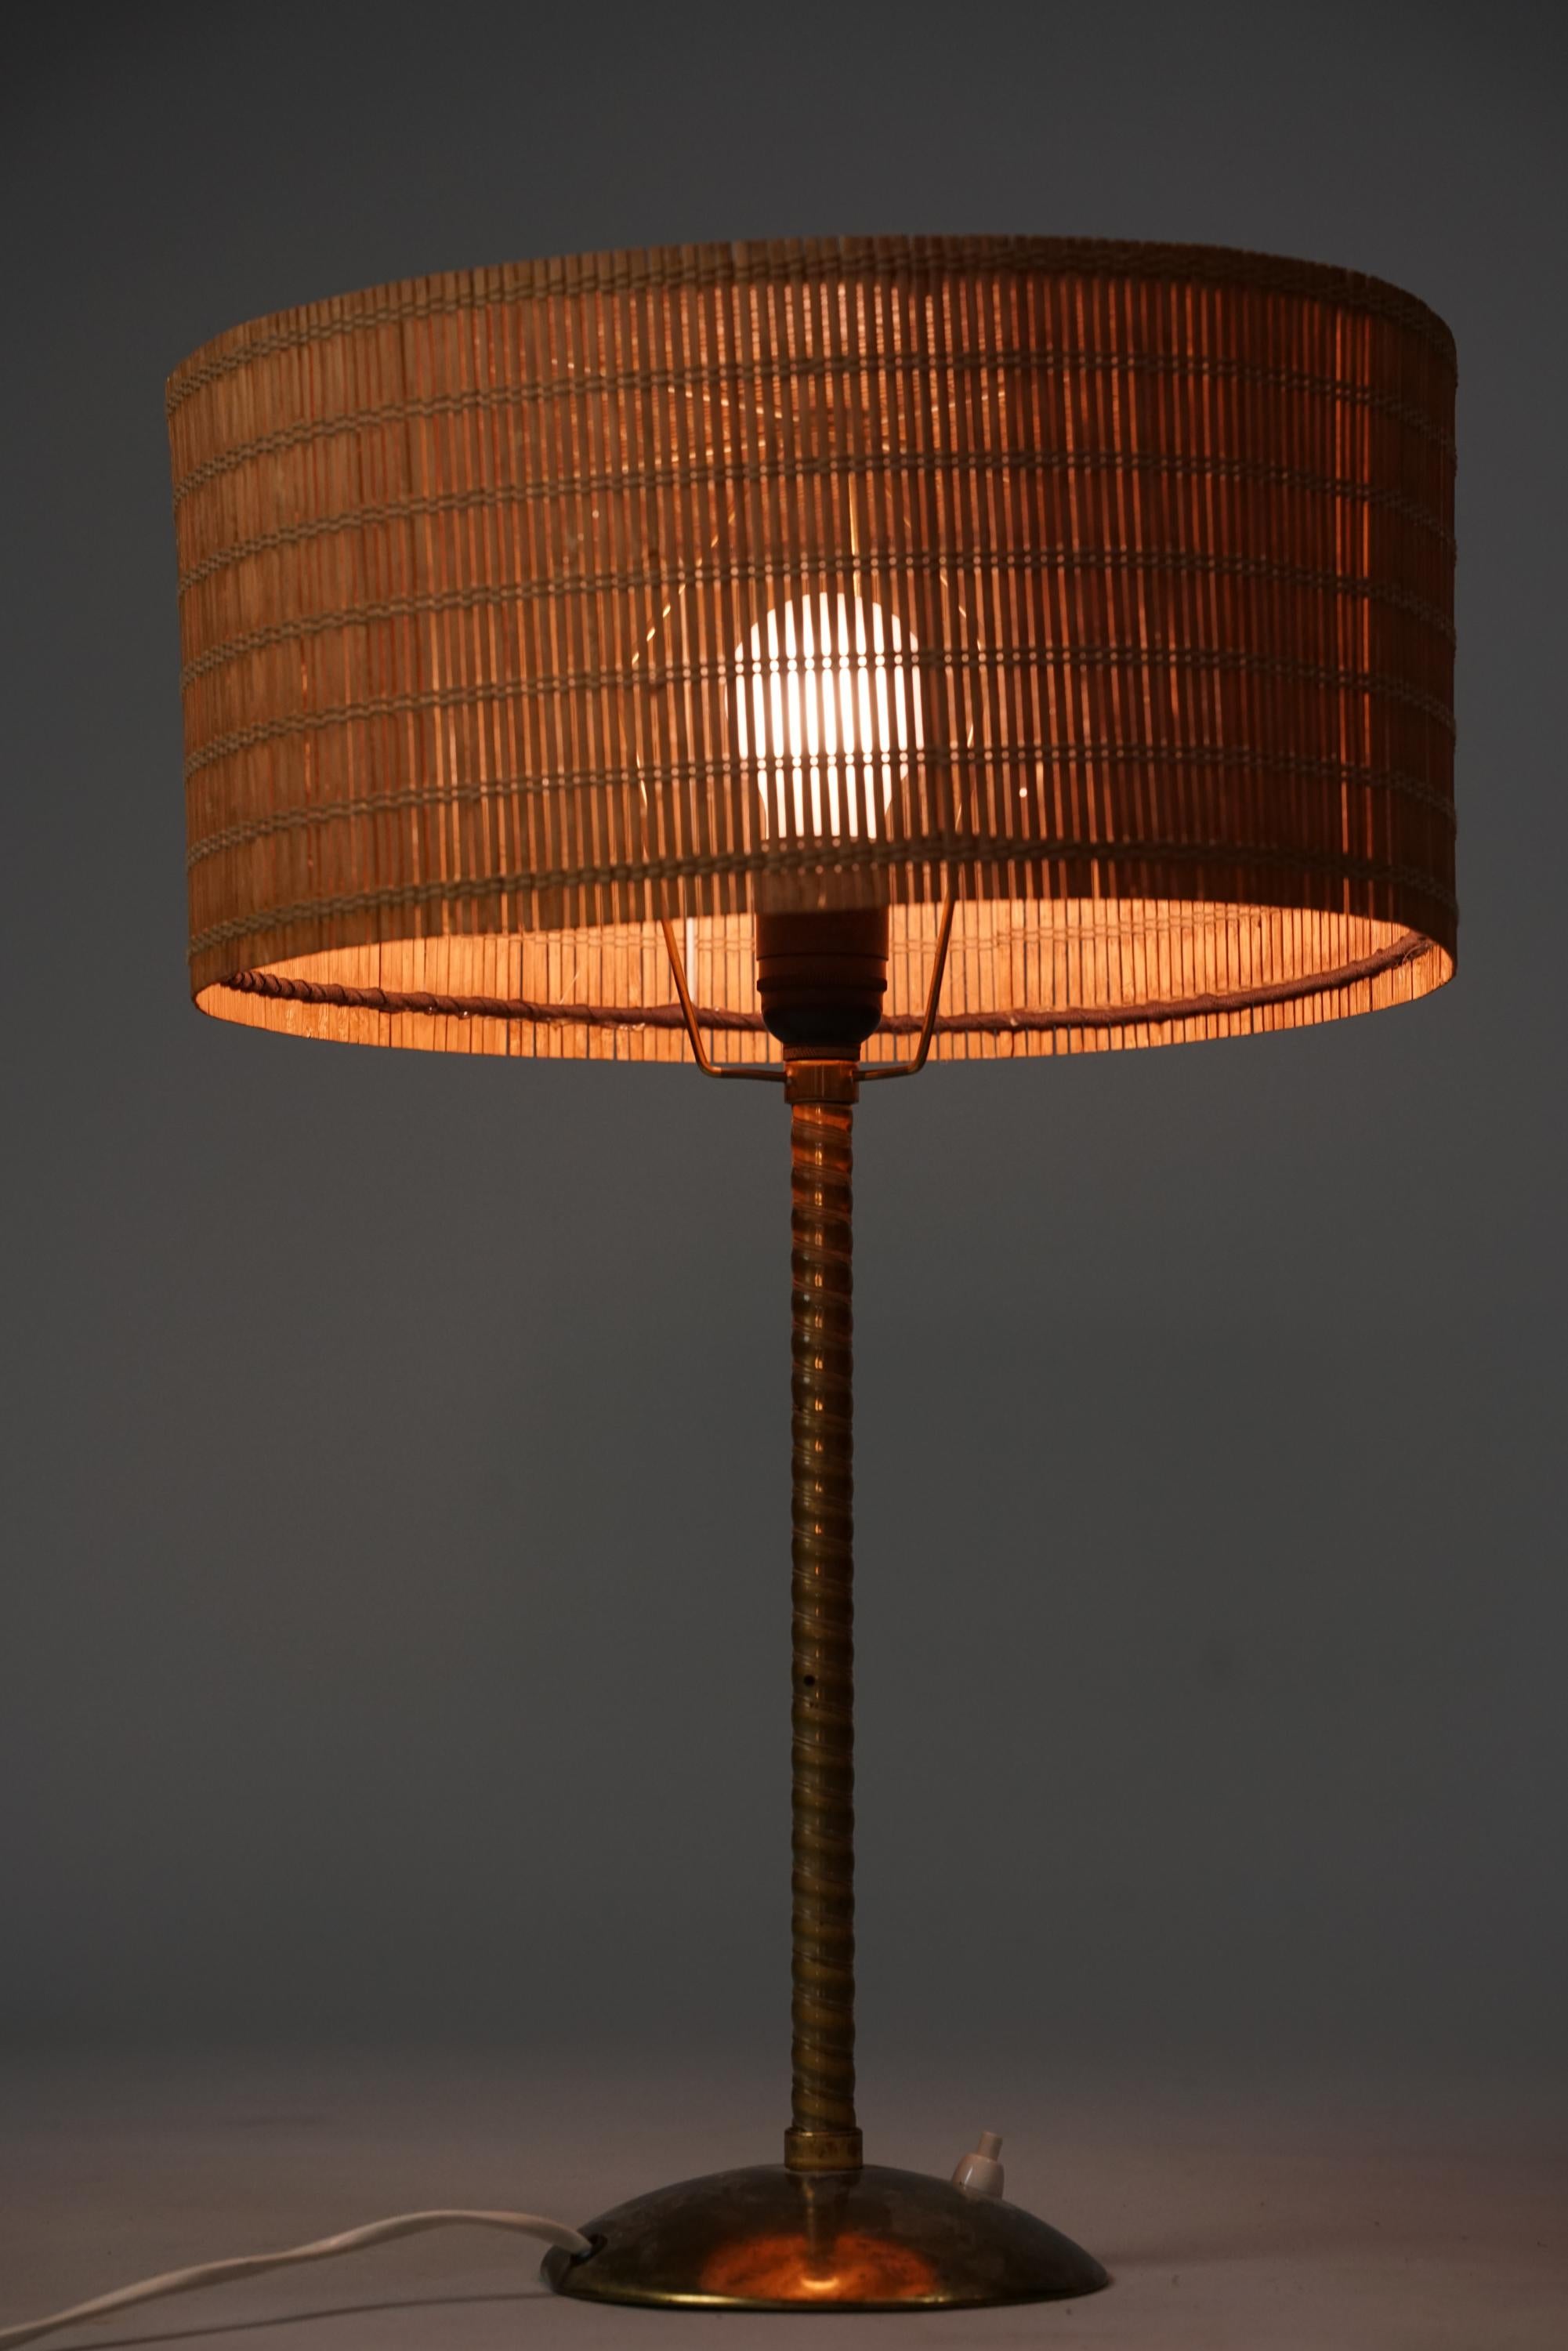 Rare  table lamp designed by Lisa Johansson-Pape, manufactured by Orno Oy, 1940/1950s. Brass with wooden slat lampshade. Good vintage condition, minor patina consistent with age and use. Beautiful and spectacular table lamp. 

Lisa Johansson-Pape is